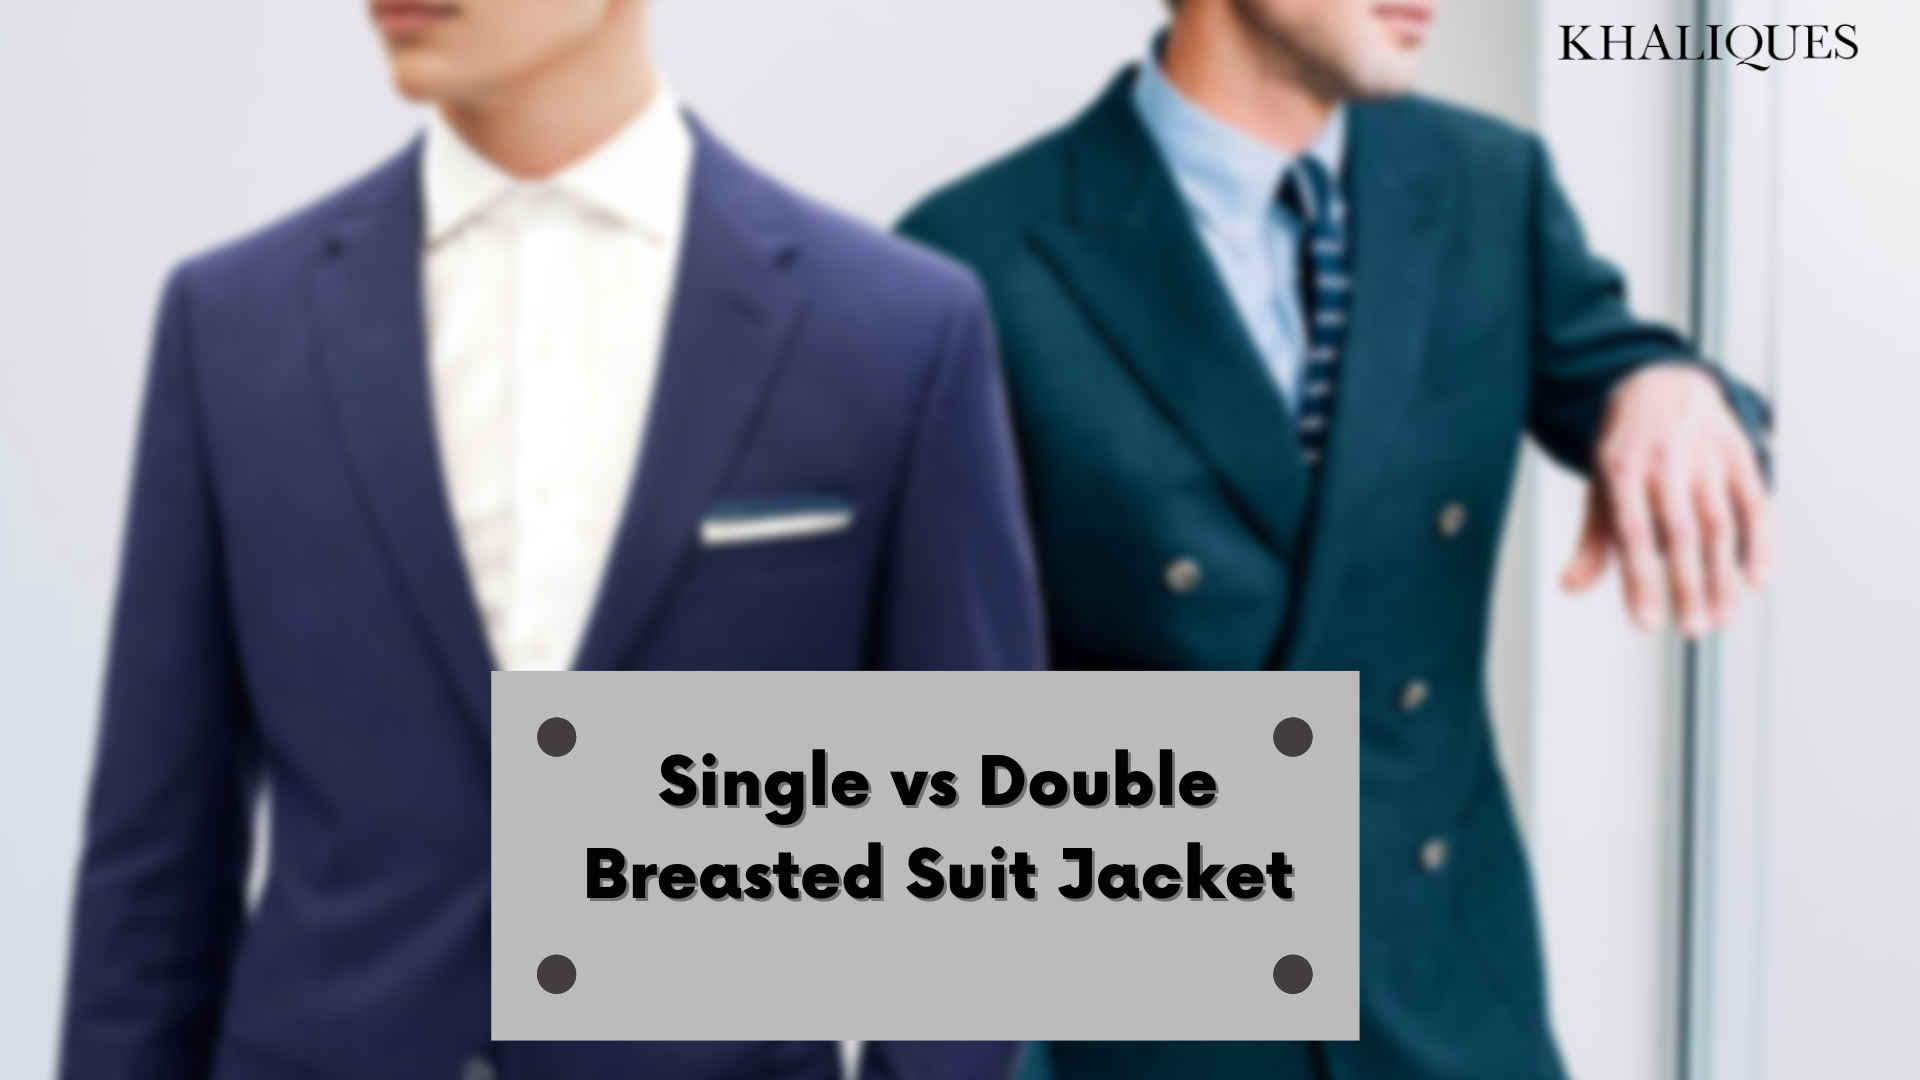 Single vs Double Breasted Suit Jacket - Dew Articles